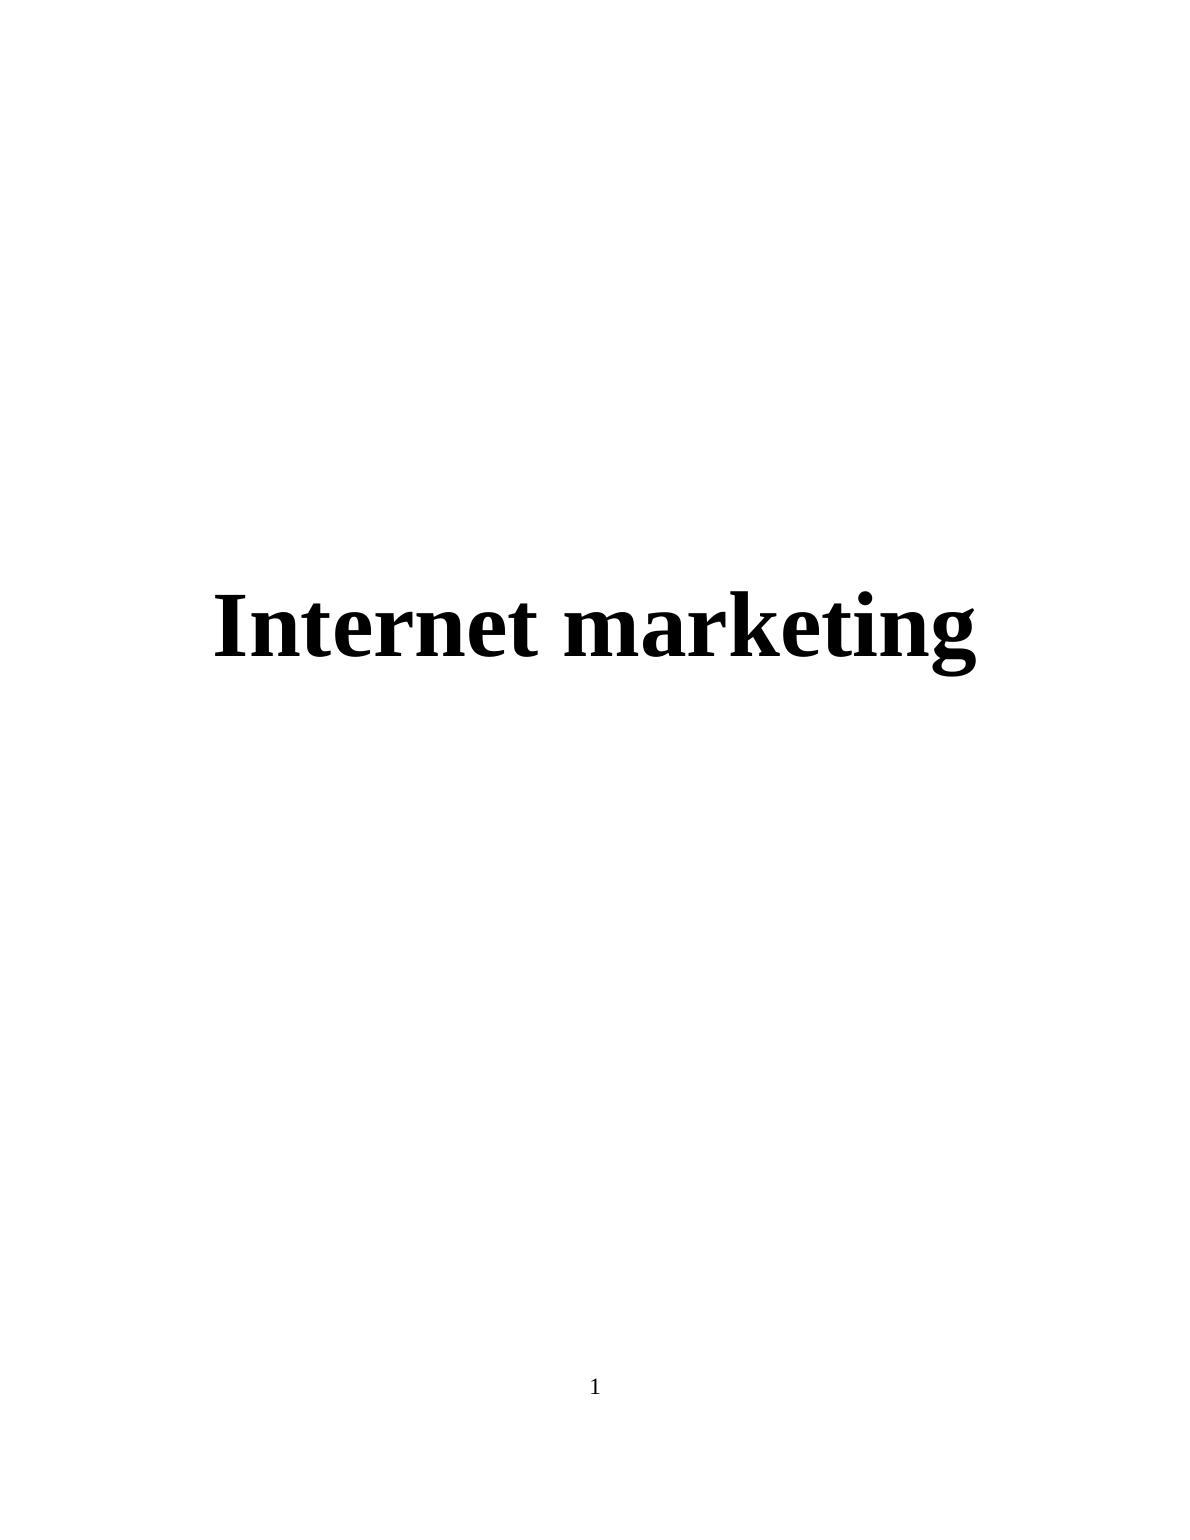 Role of Internet Marketing in Business_1